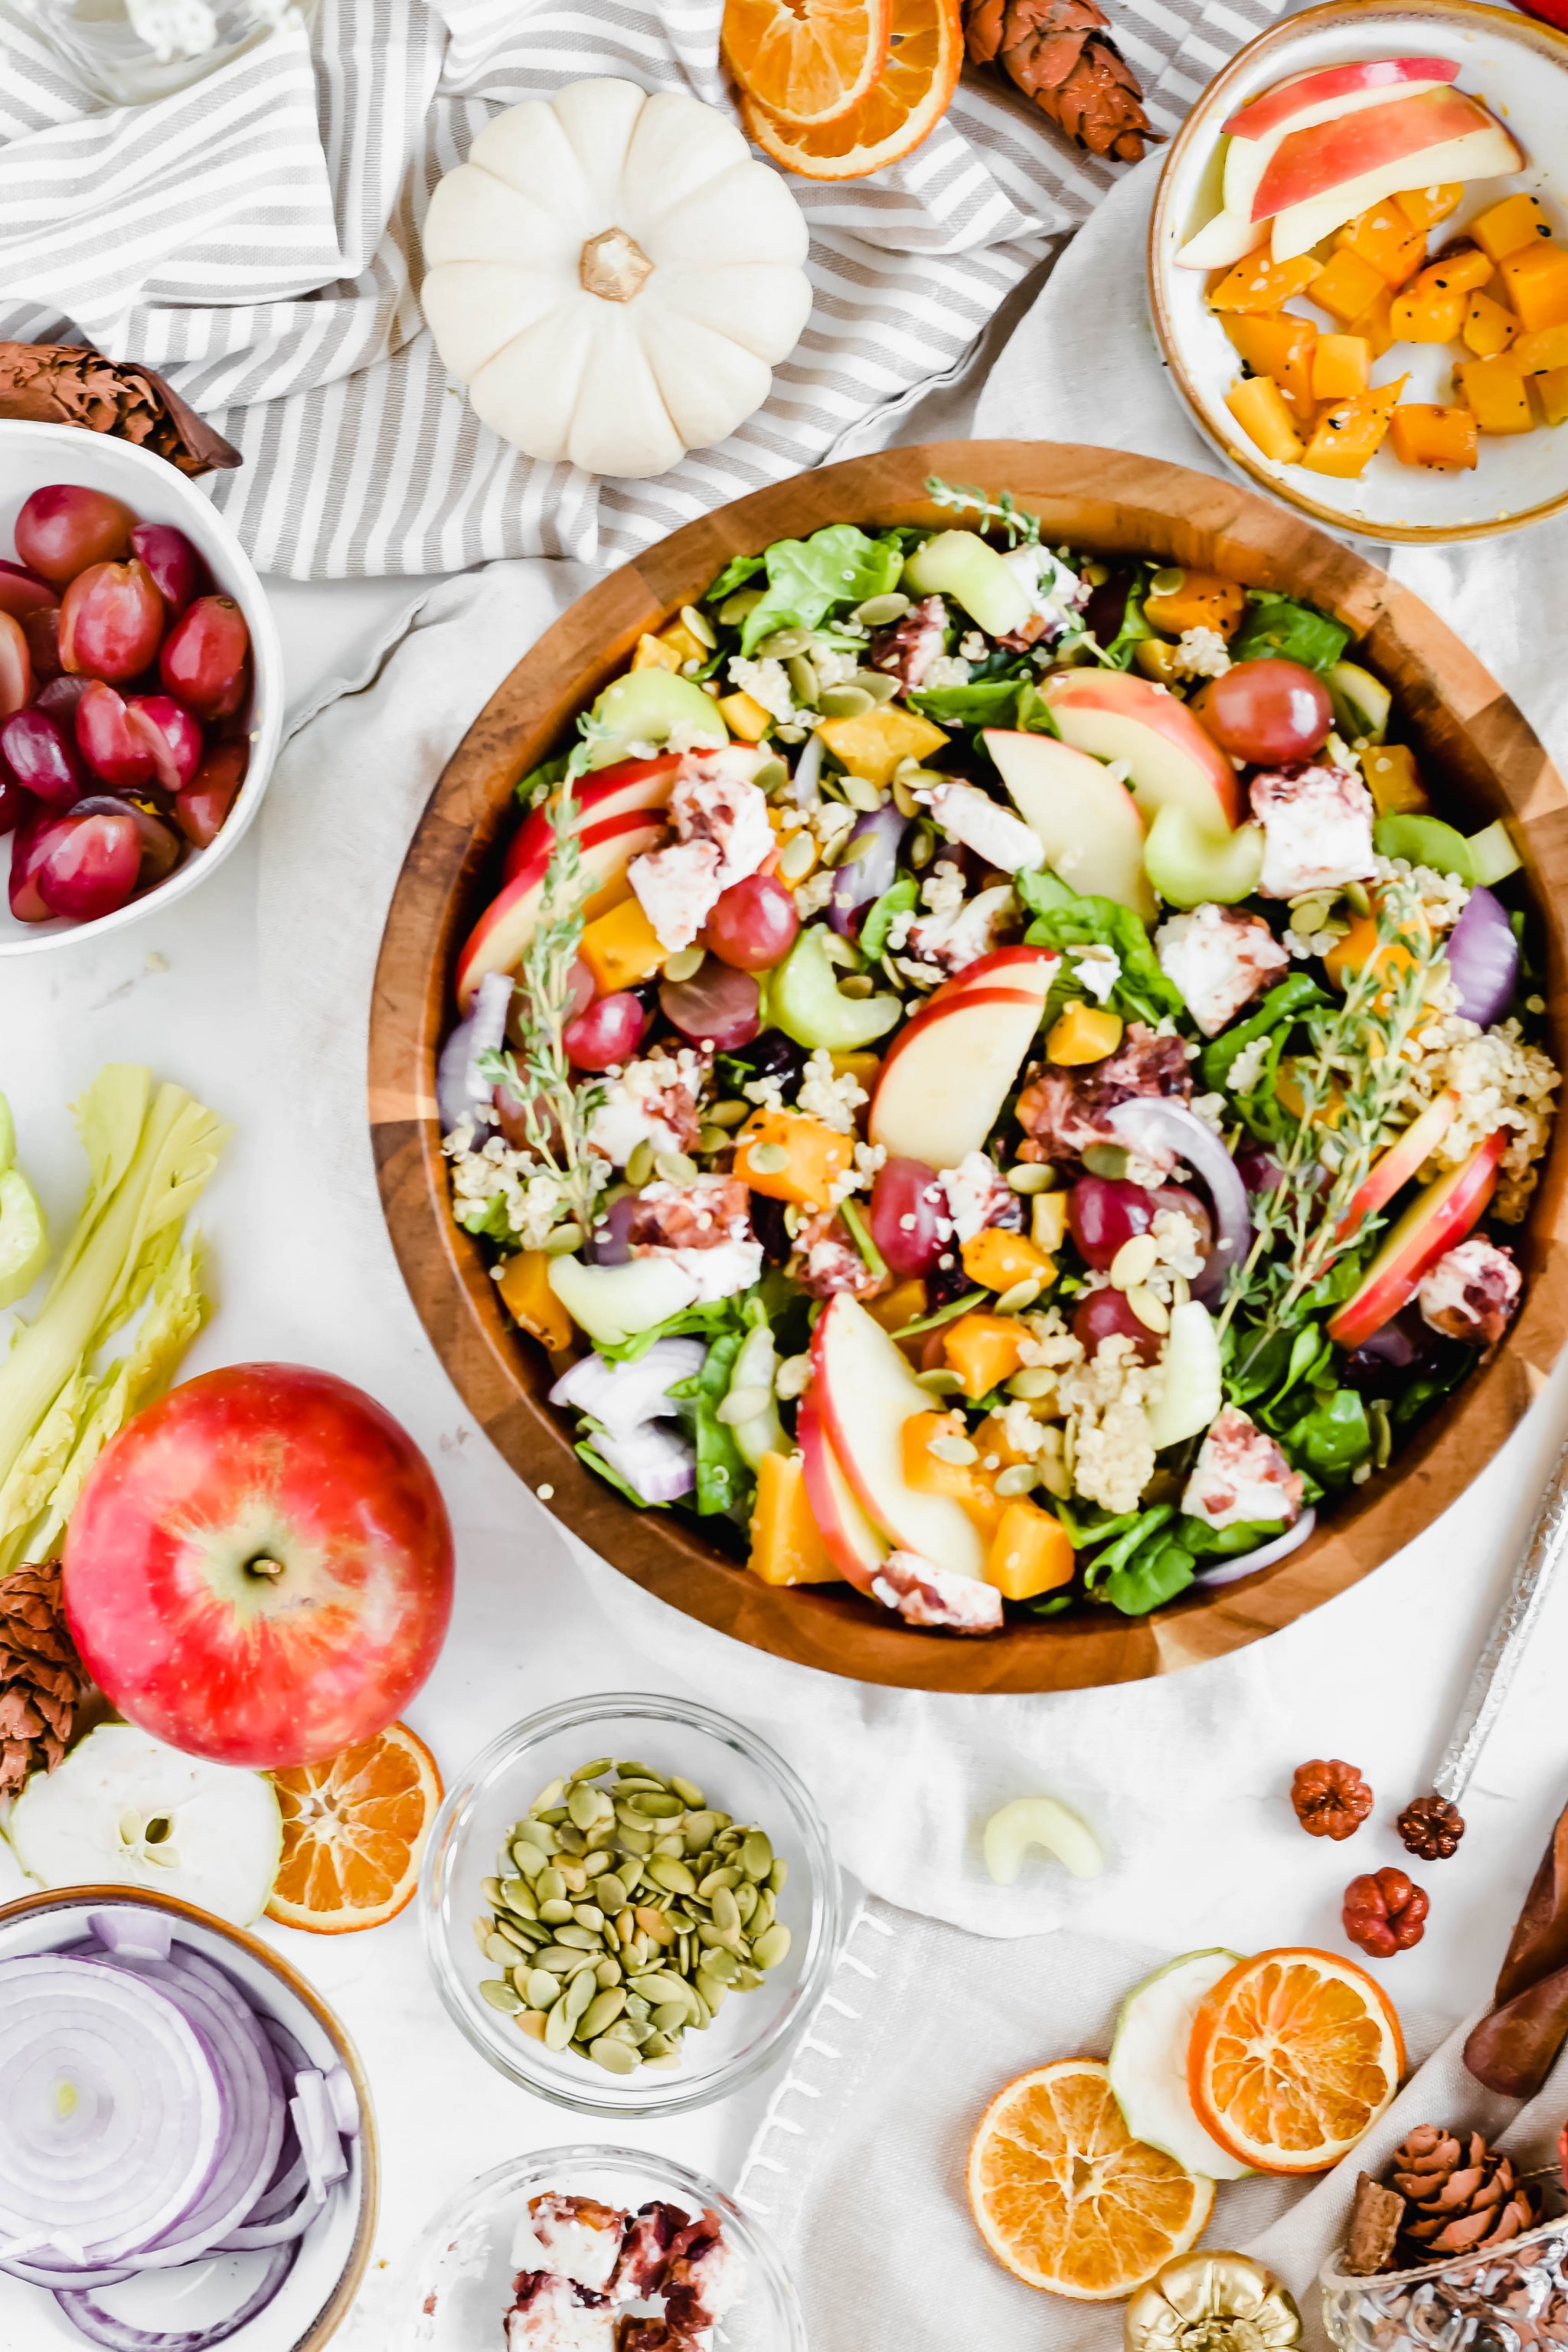 Overhead view of a Seasonal Harvest Salad filled with spinach, apples, butternut squash, grapes, and pumpkin seeds in a wooden serving bowl surrounded by salad ingredients